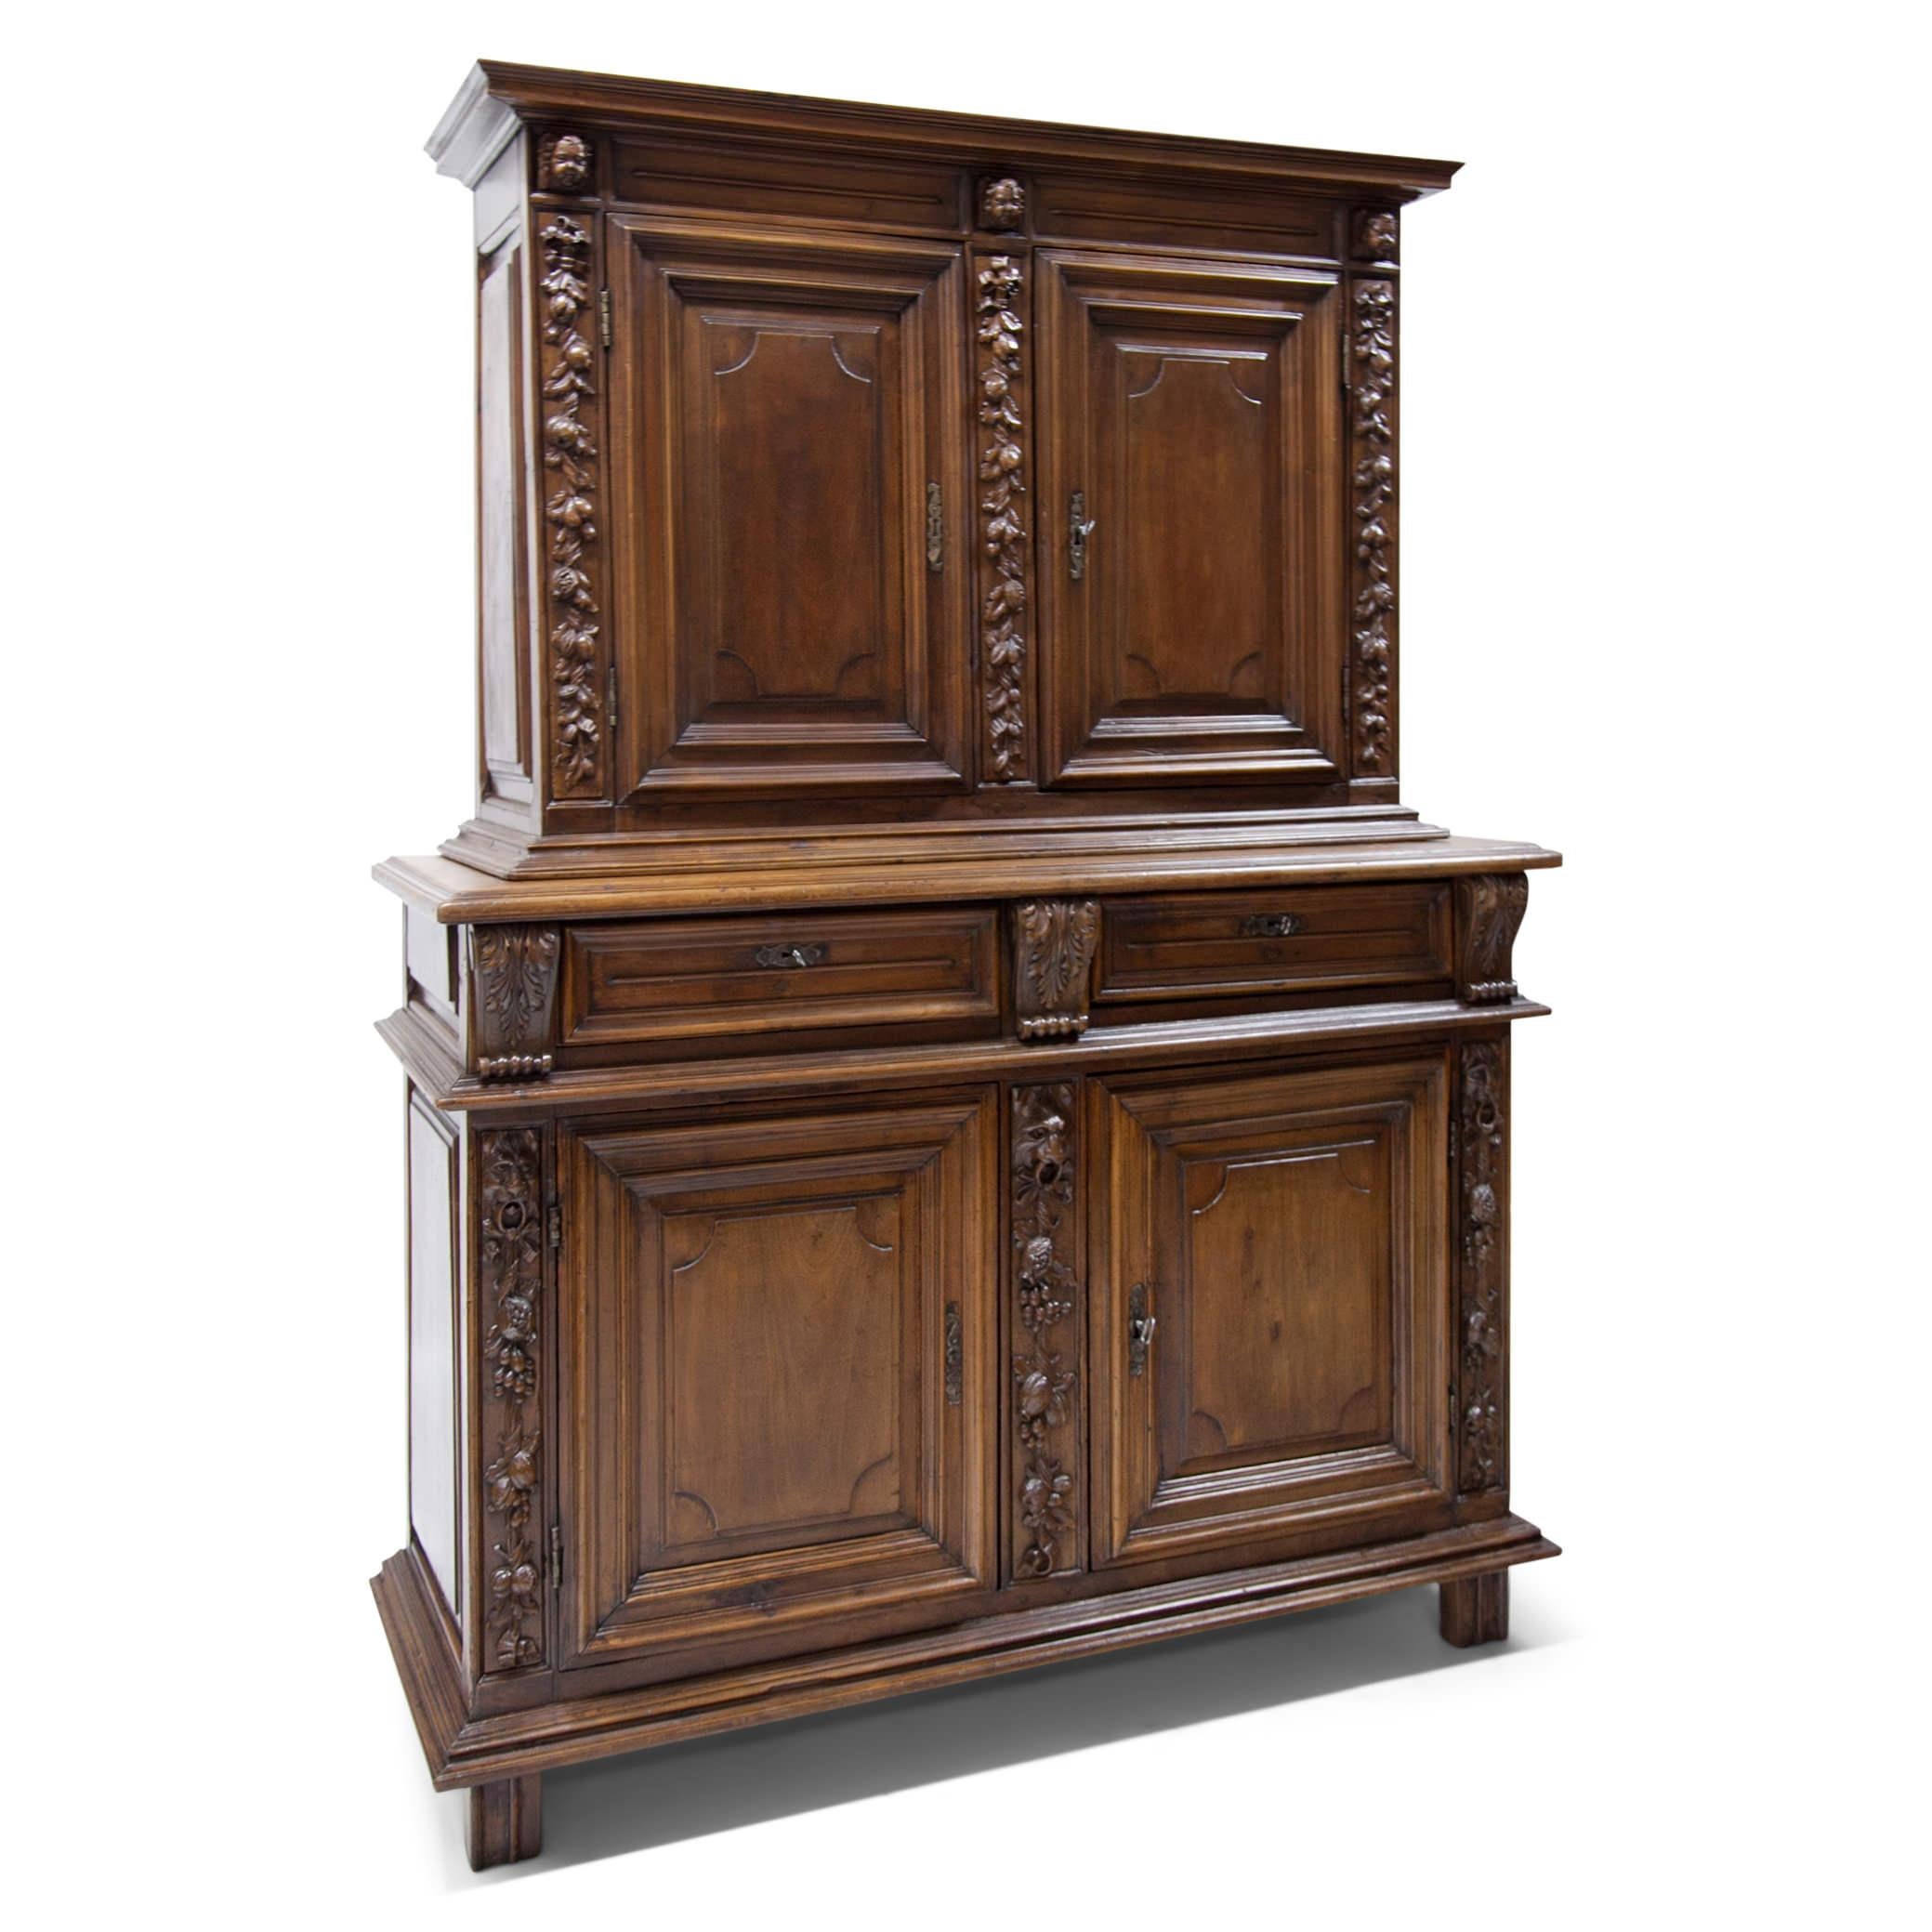 Cabinet à deux corps made out of stained walnut. The two-door base is on pad feet, the doors show fillings and moldings, the pilasters are decorated with carved fruit decor and lion head mascarons. This is followed by two drawers with volute